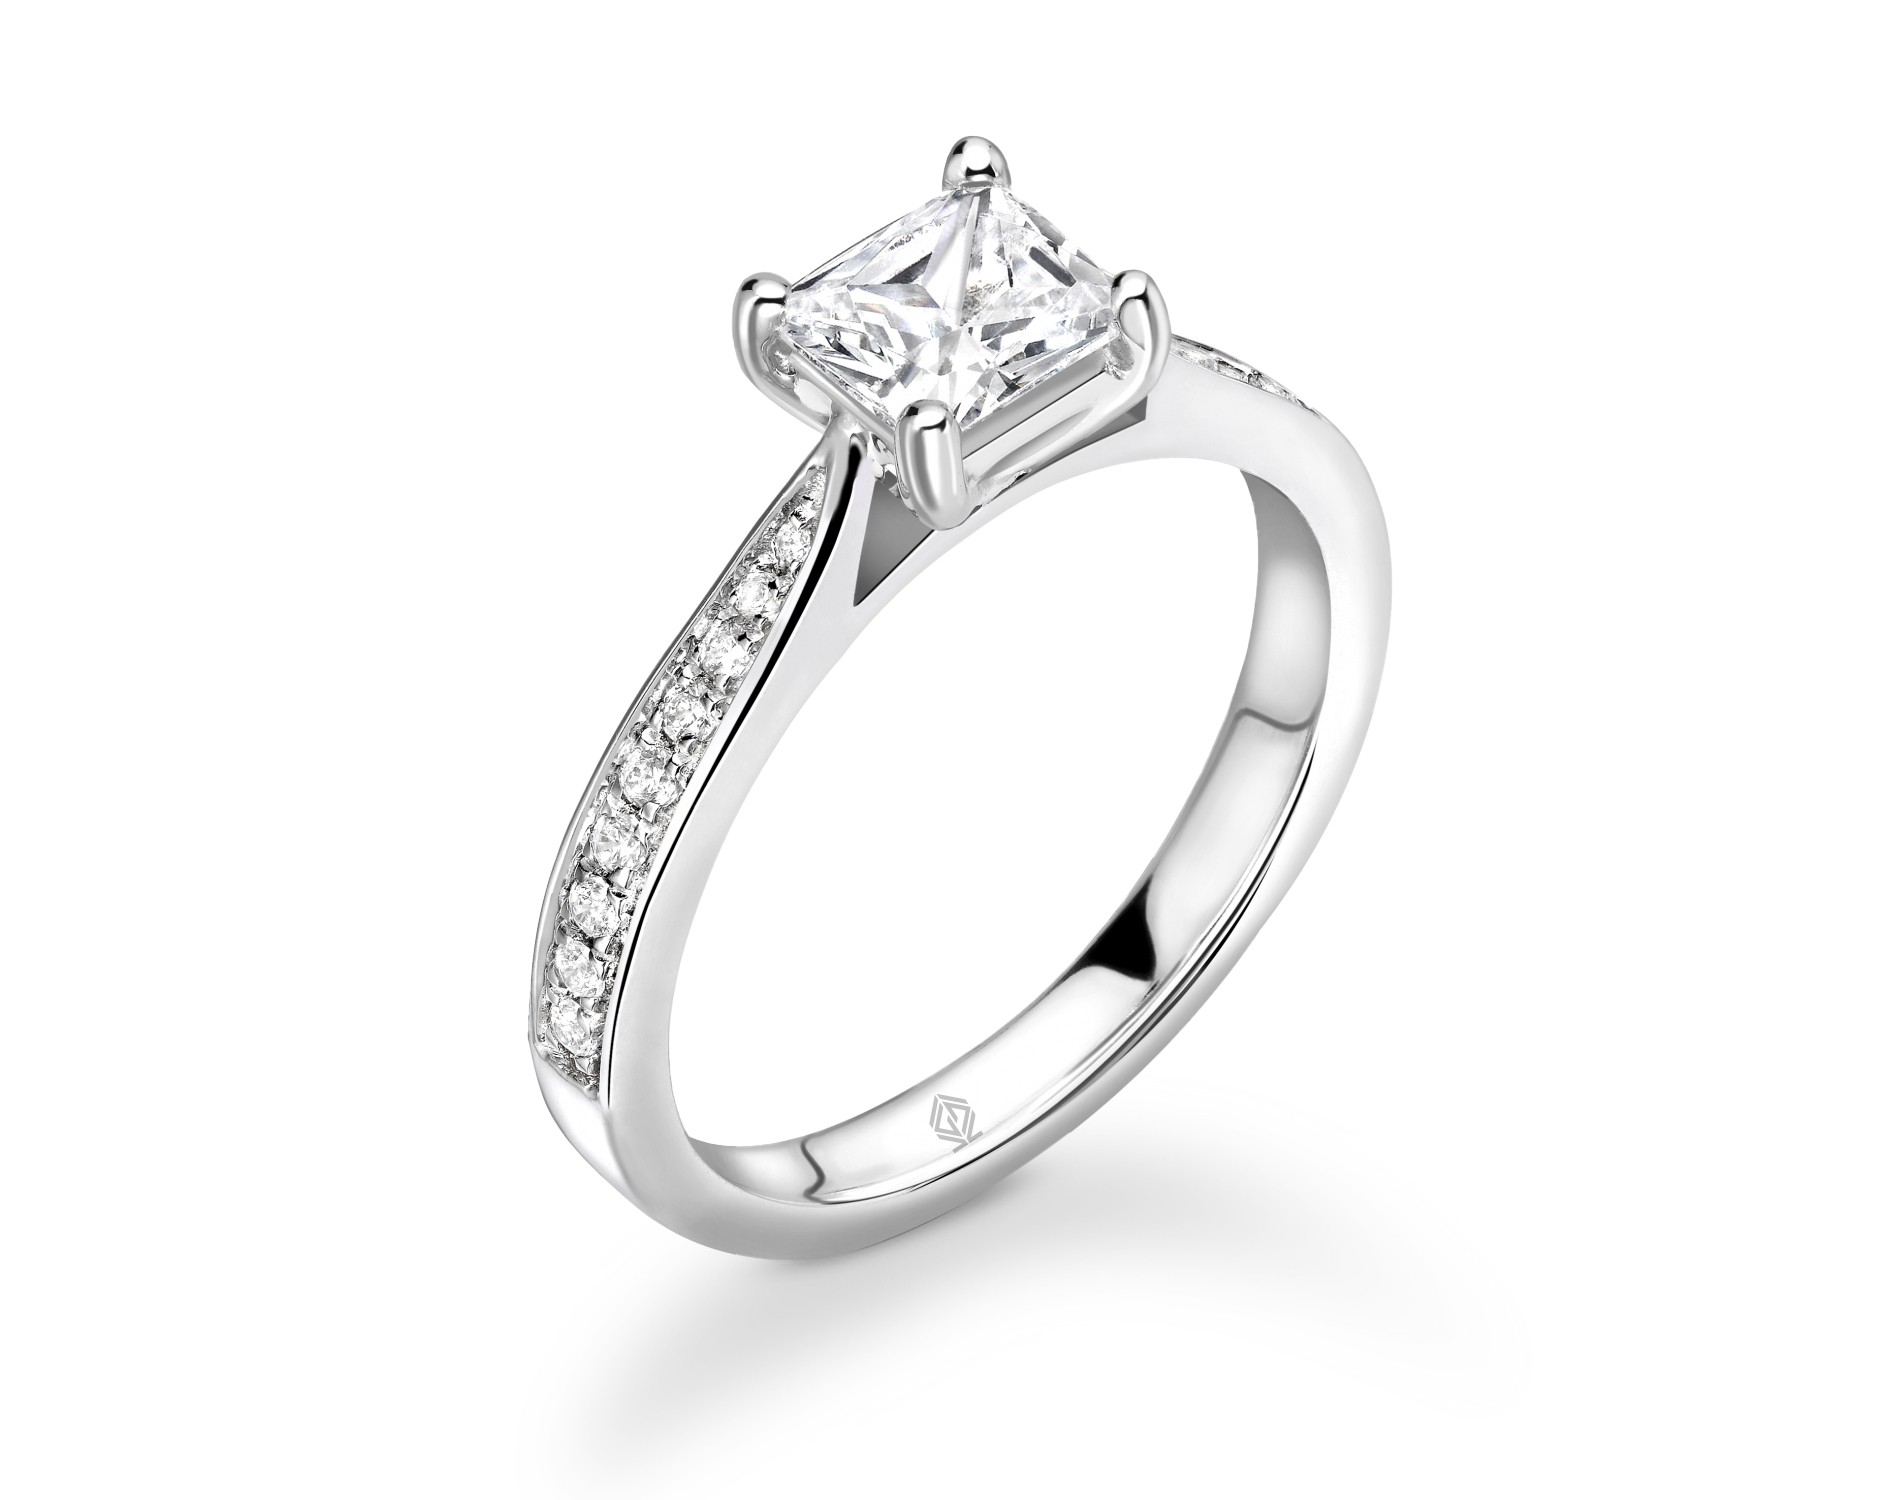 18K WHITE GOLD PRINCESS CUT DIAMOND ENGAGEMENT RING WITH SIDE STONES CHANNEL SET